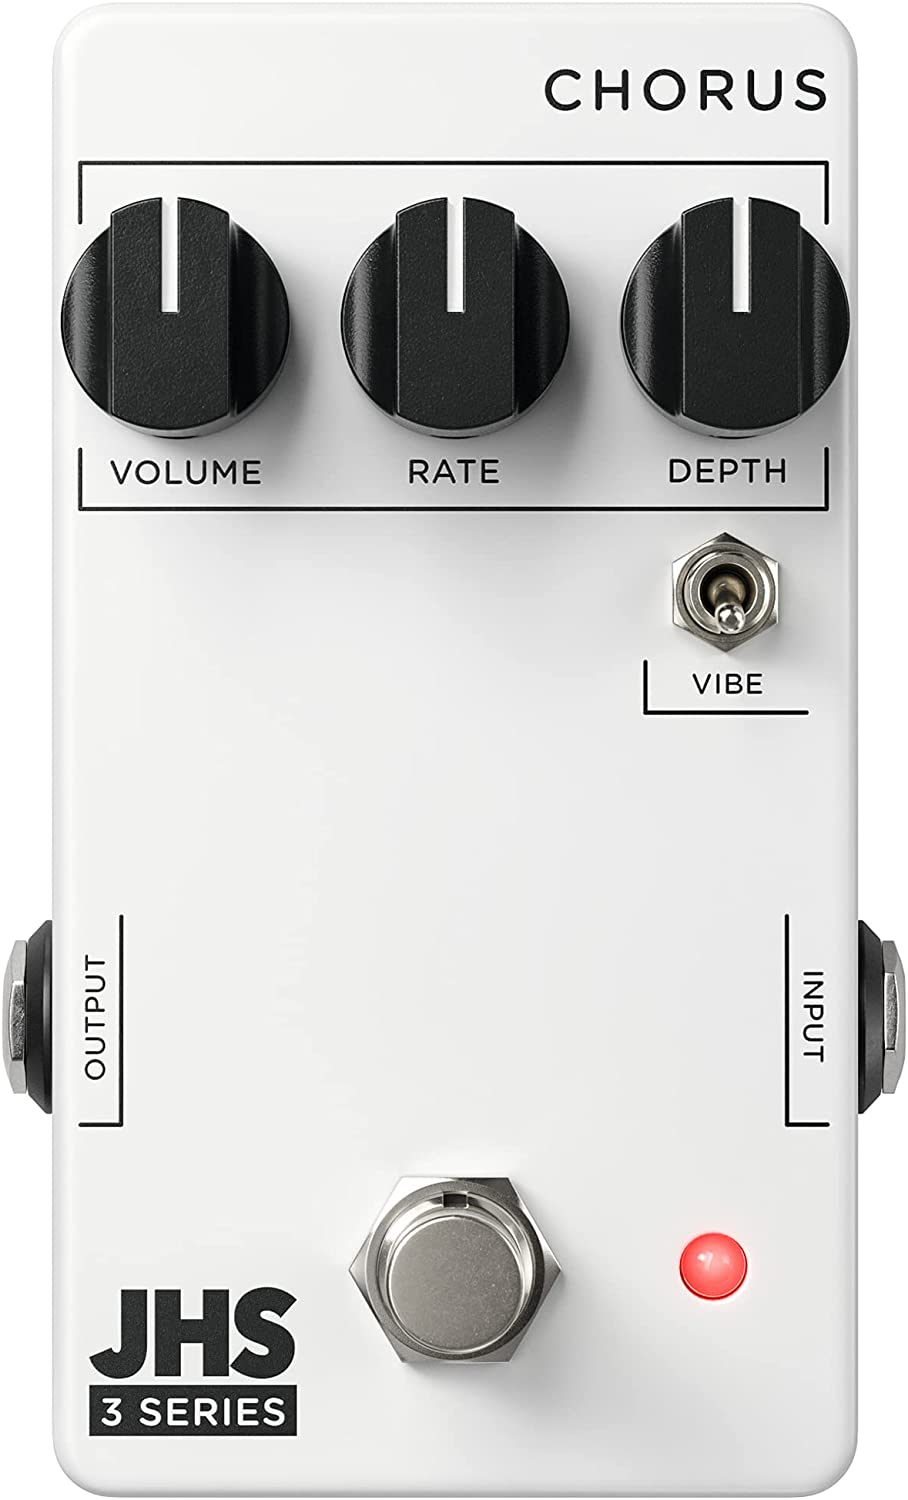 JHS Pedals 3 Series Chorus Pedal on a white background